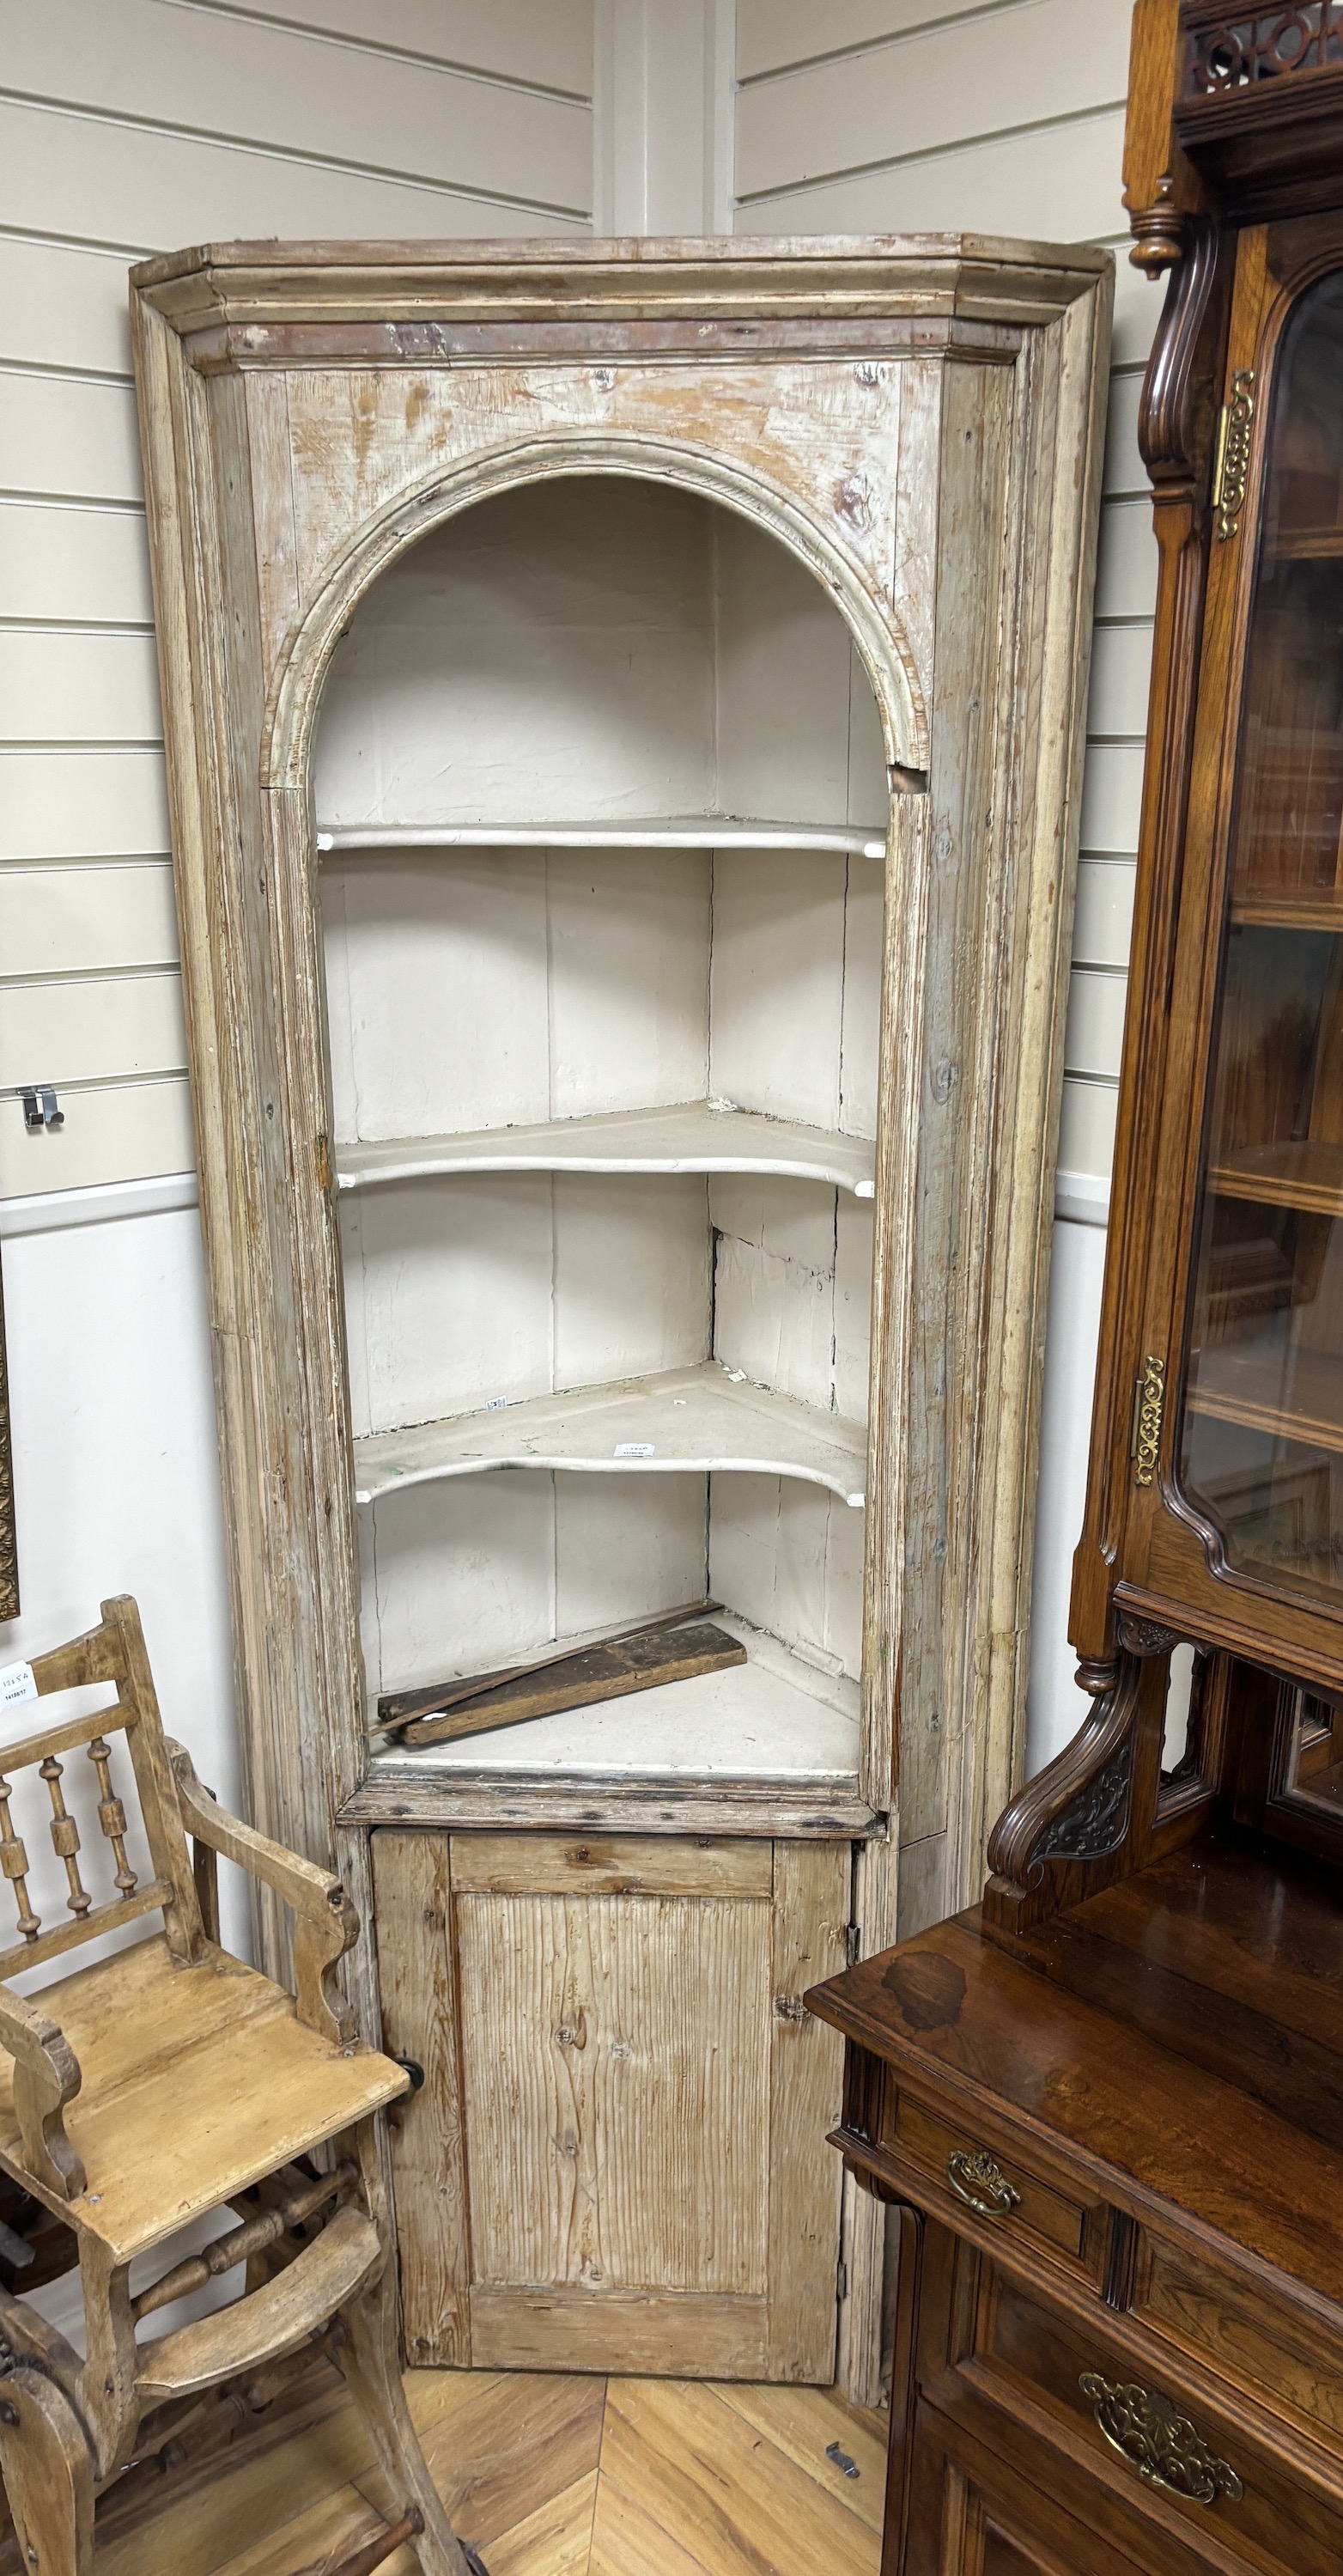 A 19th century pine standing corner cupboard, width 82cm, depth 42cm, height 210cm, Provenance- Brede Place, East Sussex, a former residence of the Frewen family from 1712-1936.